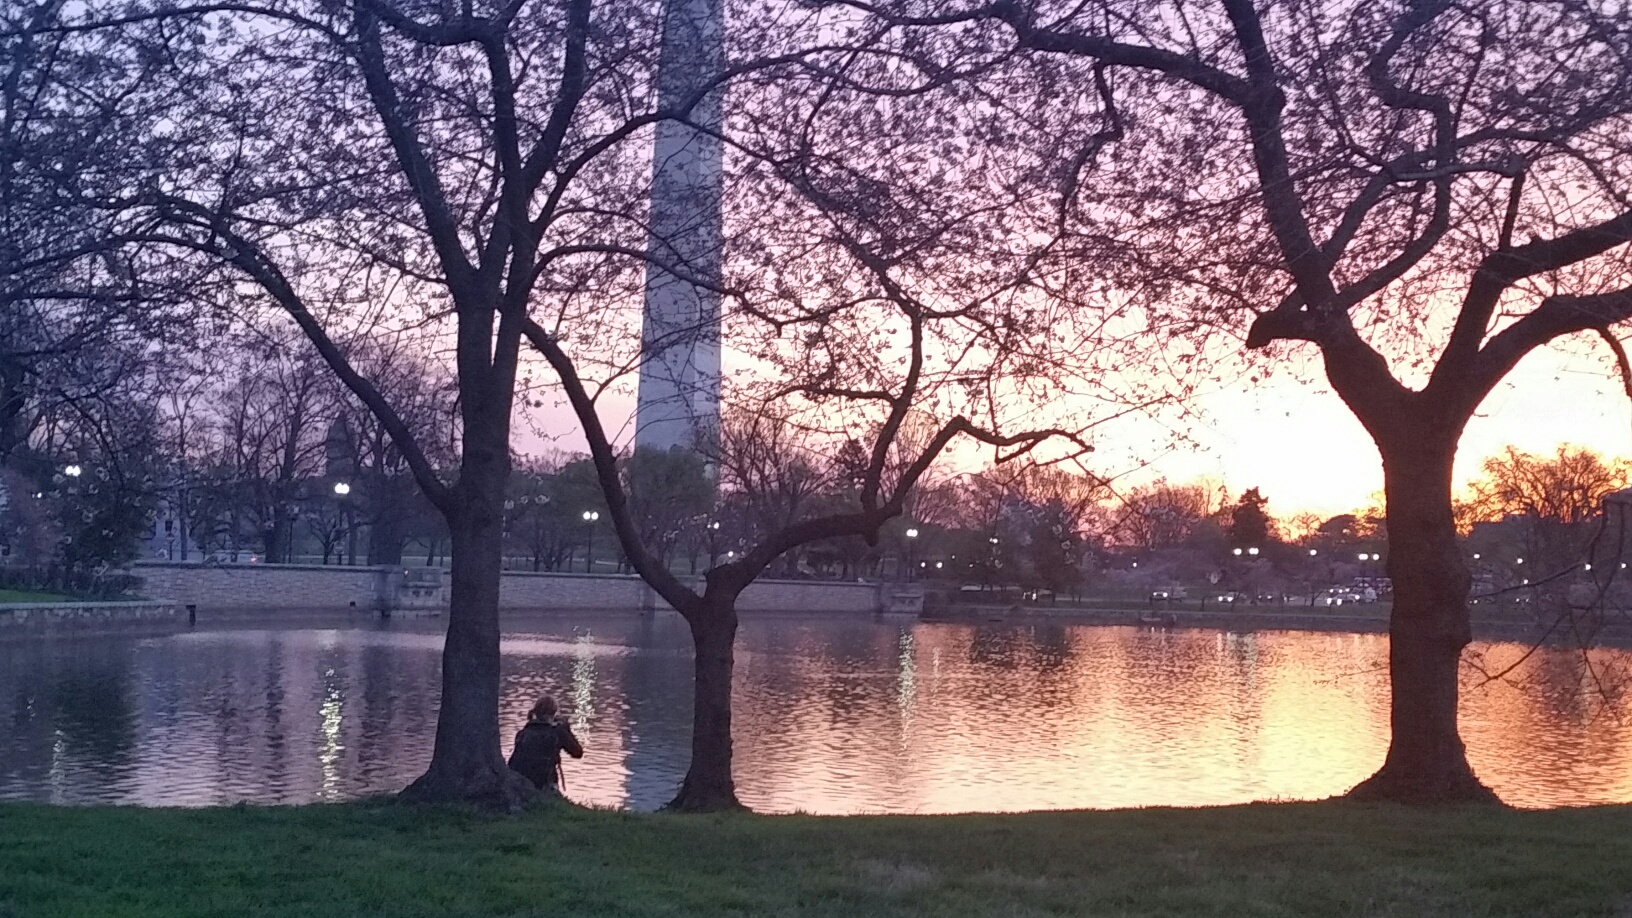 Cherry blossom watch: Weekend could bring cold weather, change in peak bloom